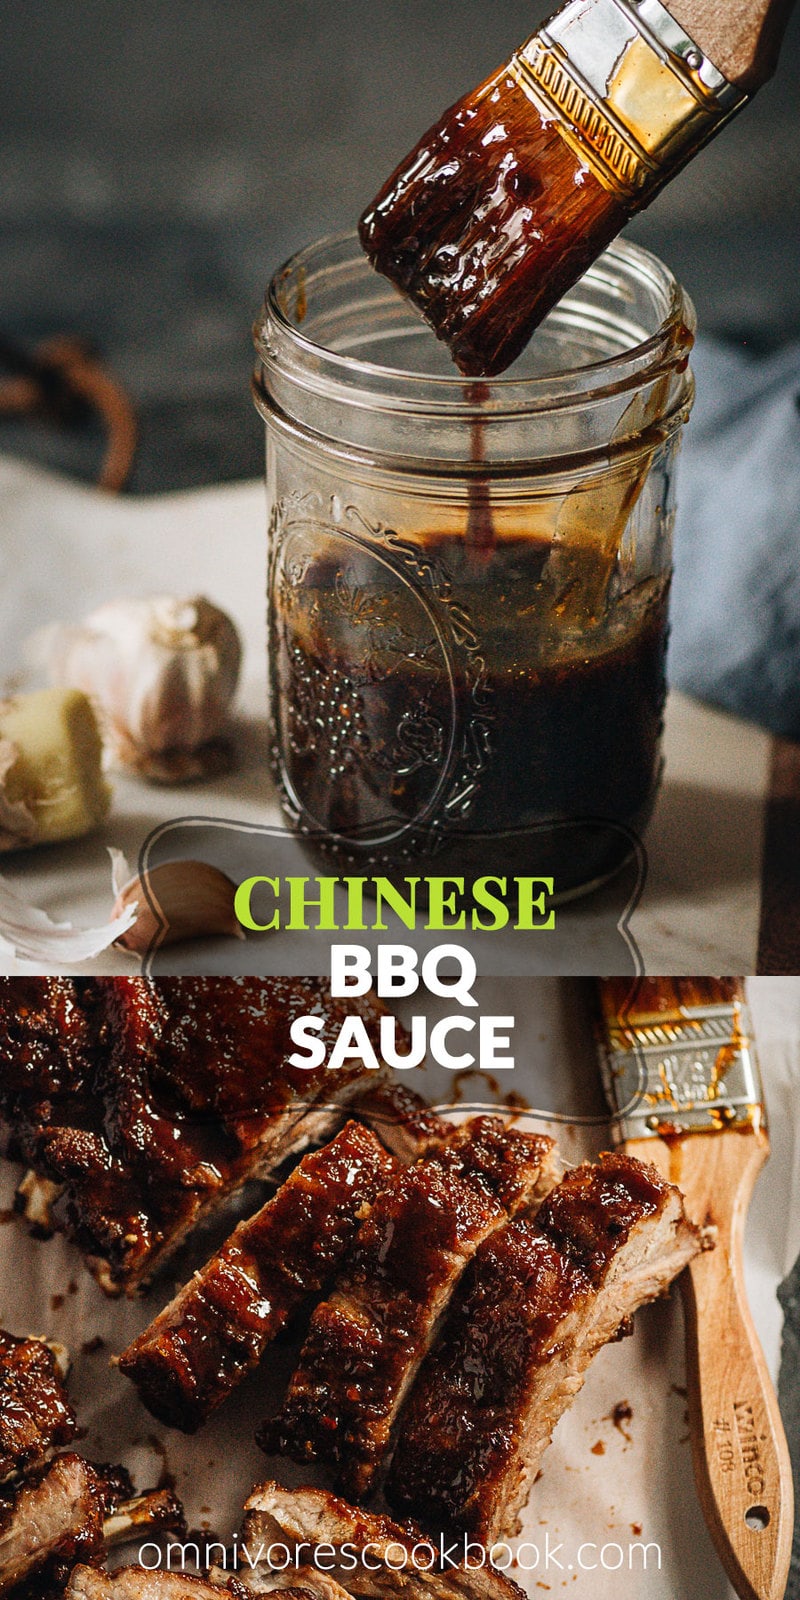 Chinese BBQ Sauce - The homemade BBQ sauce has a rich, sweet, savory taste with well-balanced Asian notes of ginger and five spice. It is super fast to make and has a thick consistency. Make your favorite dishes using this Chinese BBQ sauce to replace your regular sauce and make your weekday dinners more interesting! {Gluten-Free adaptable}